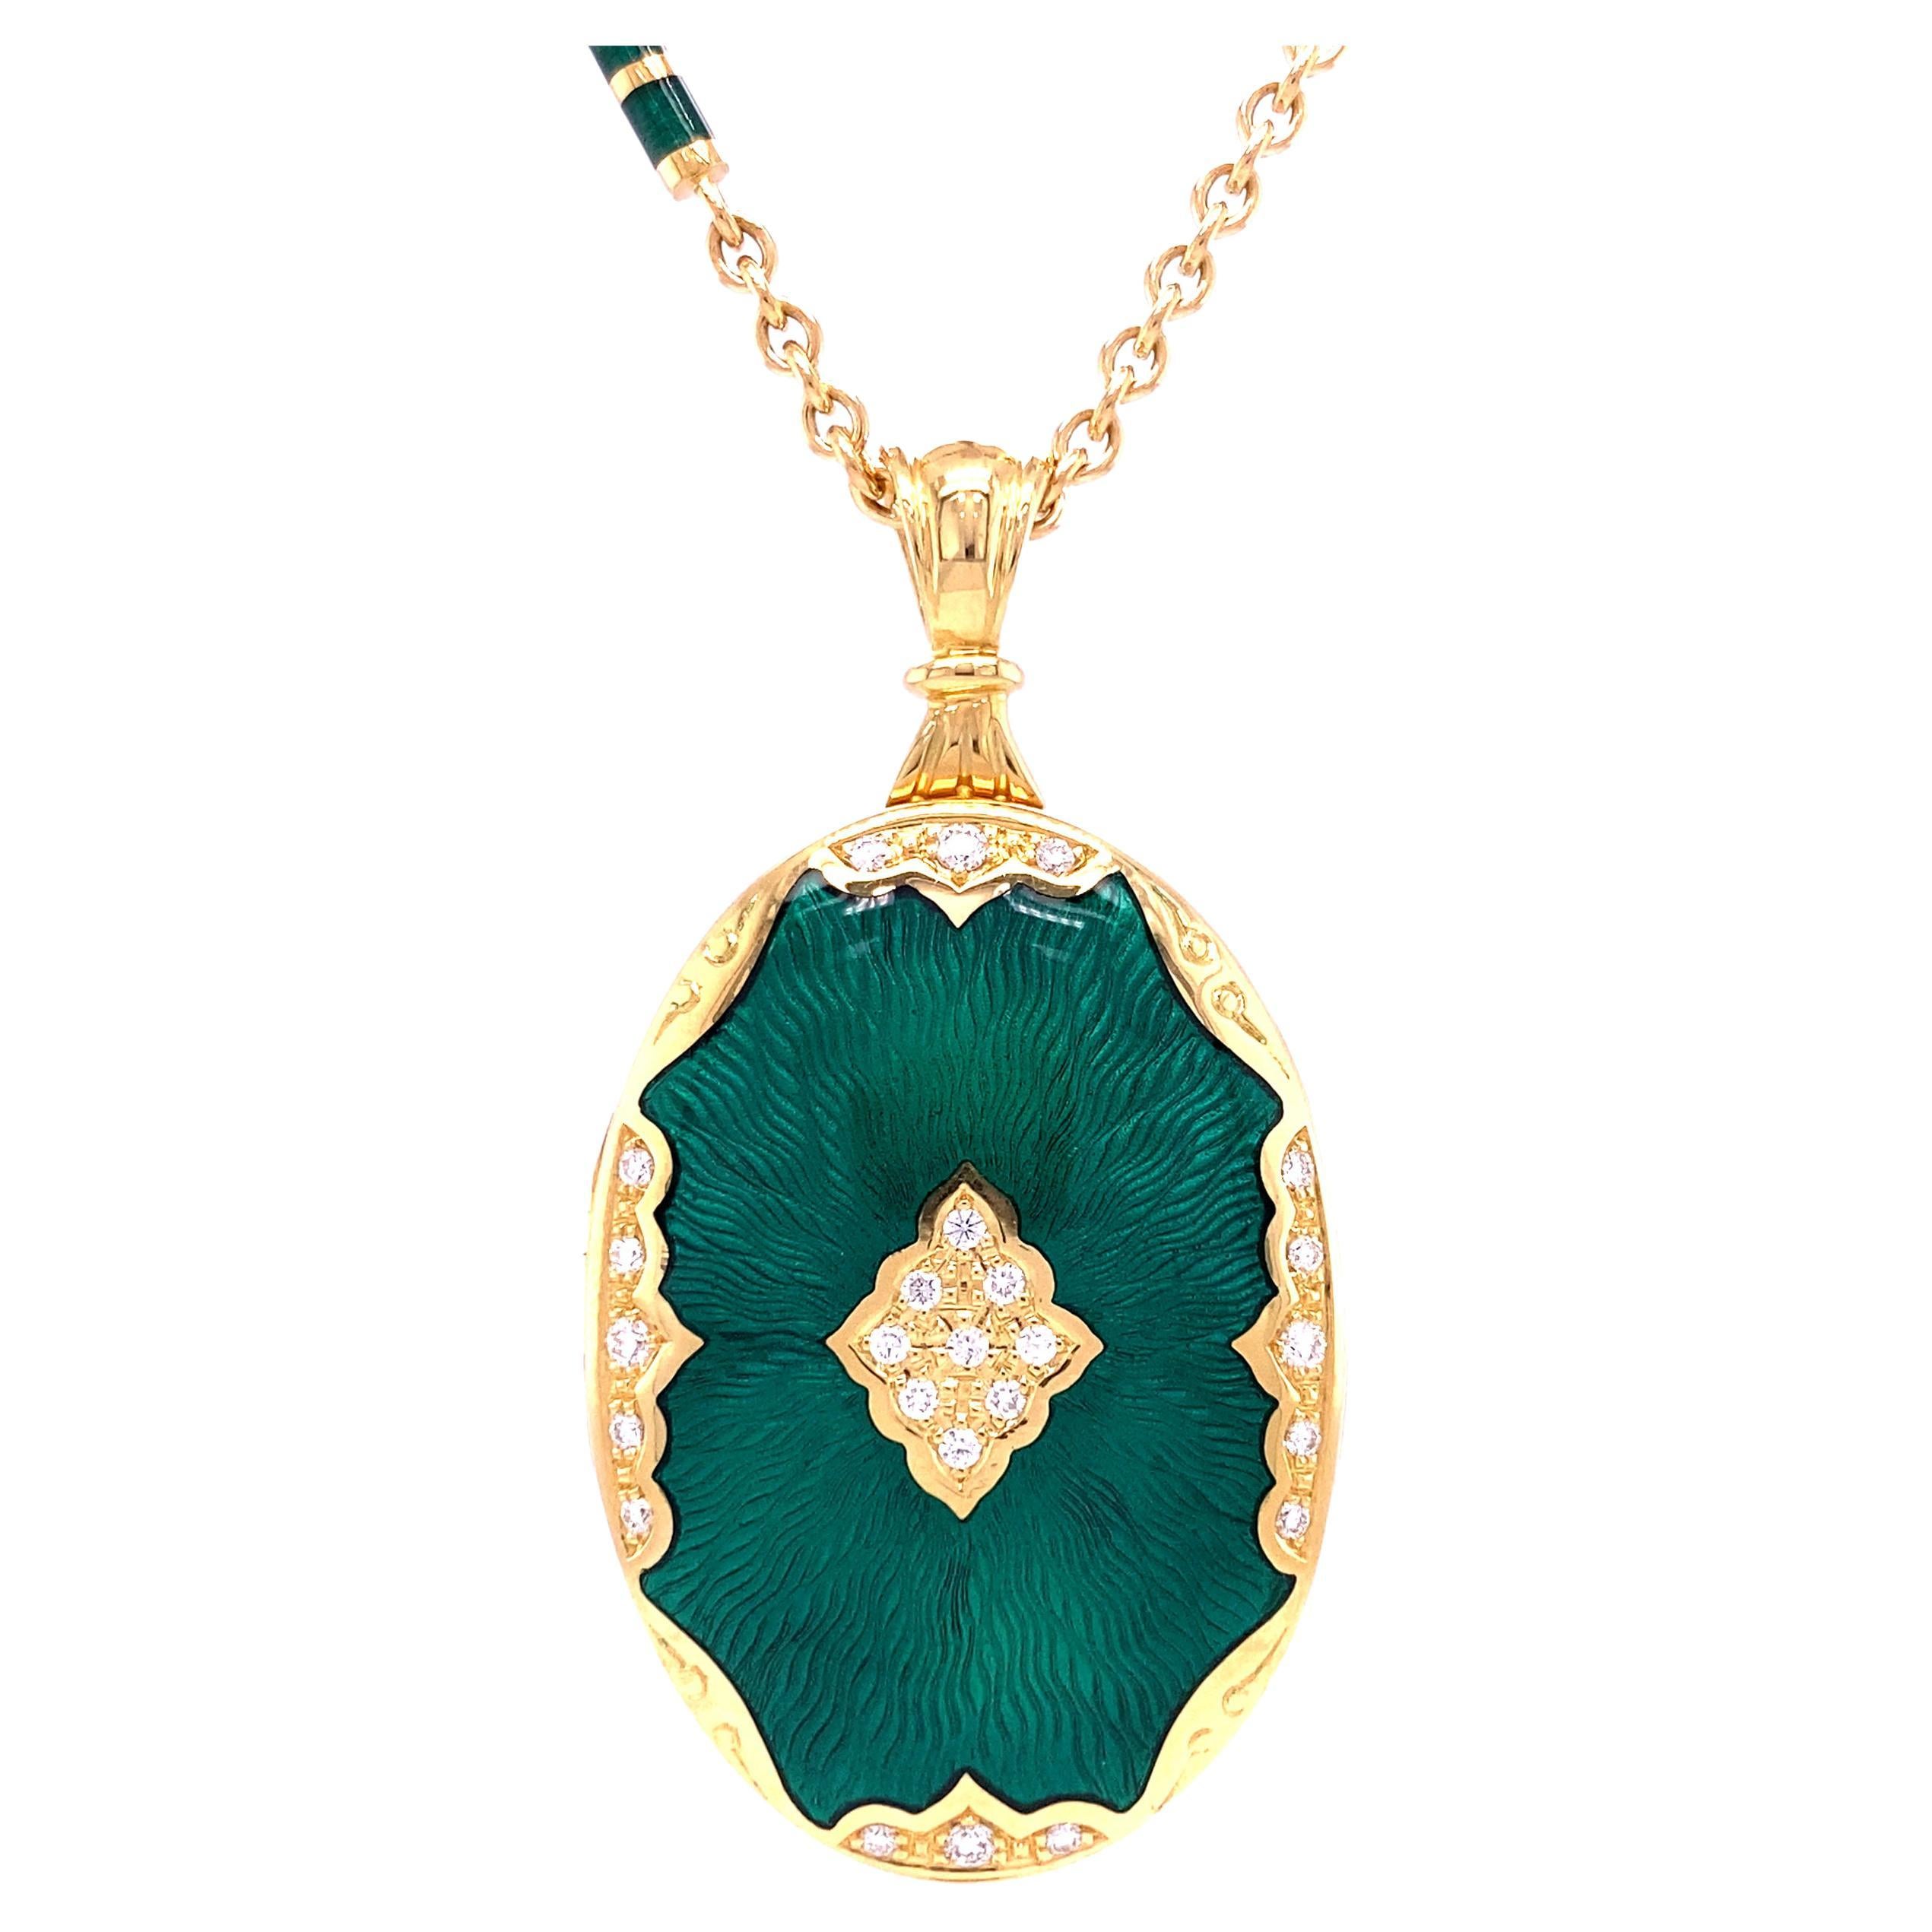 Oval Locket Necklace 18k Yellow Gold Green Enamel Guilloche 25 Diamonds 0.29 ct For Sale